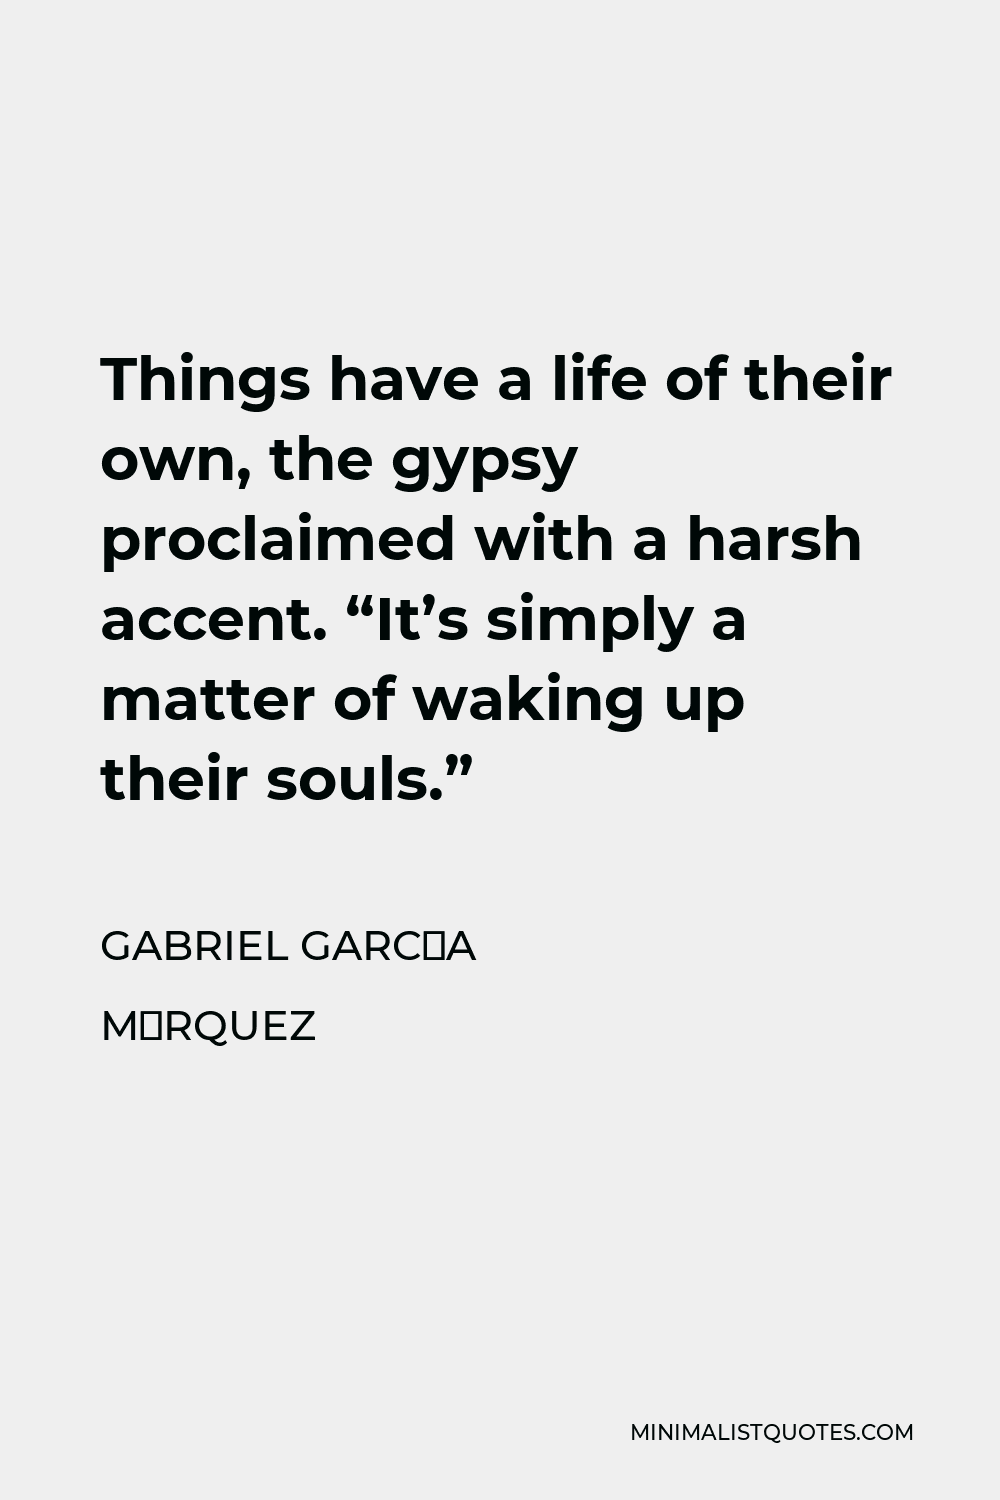 Gabriel García Márquez Quote - Things have a life of their own, the gypsy proclaimed with a harsh accent. “It’s simply a matter of waking up their souls.”